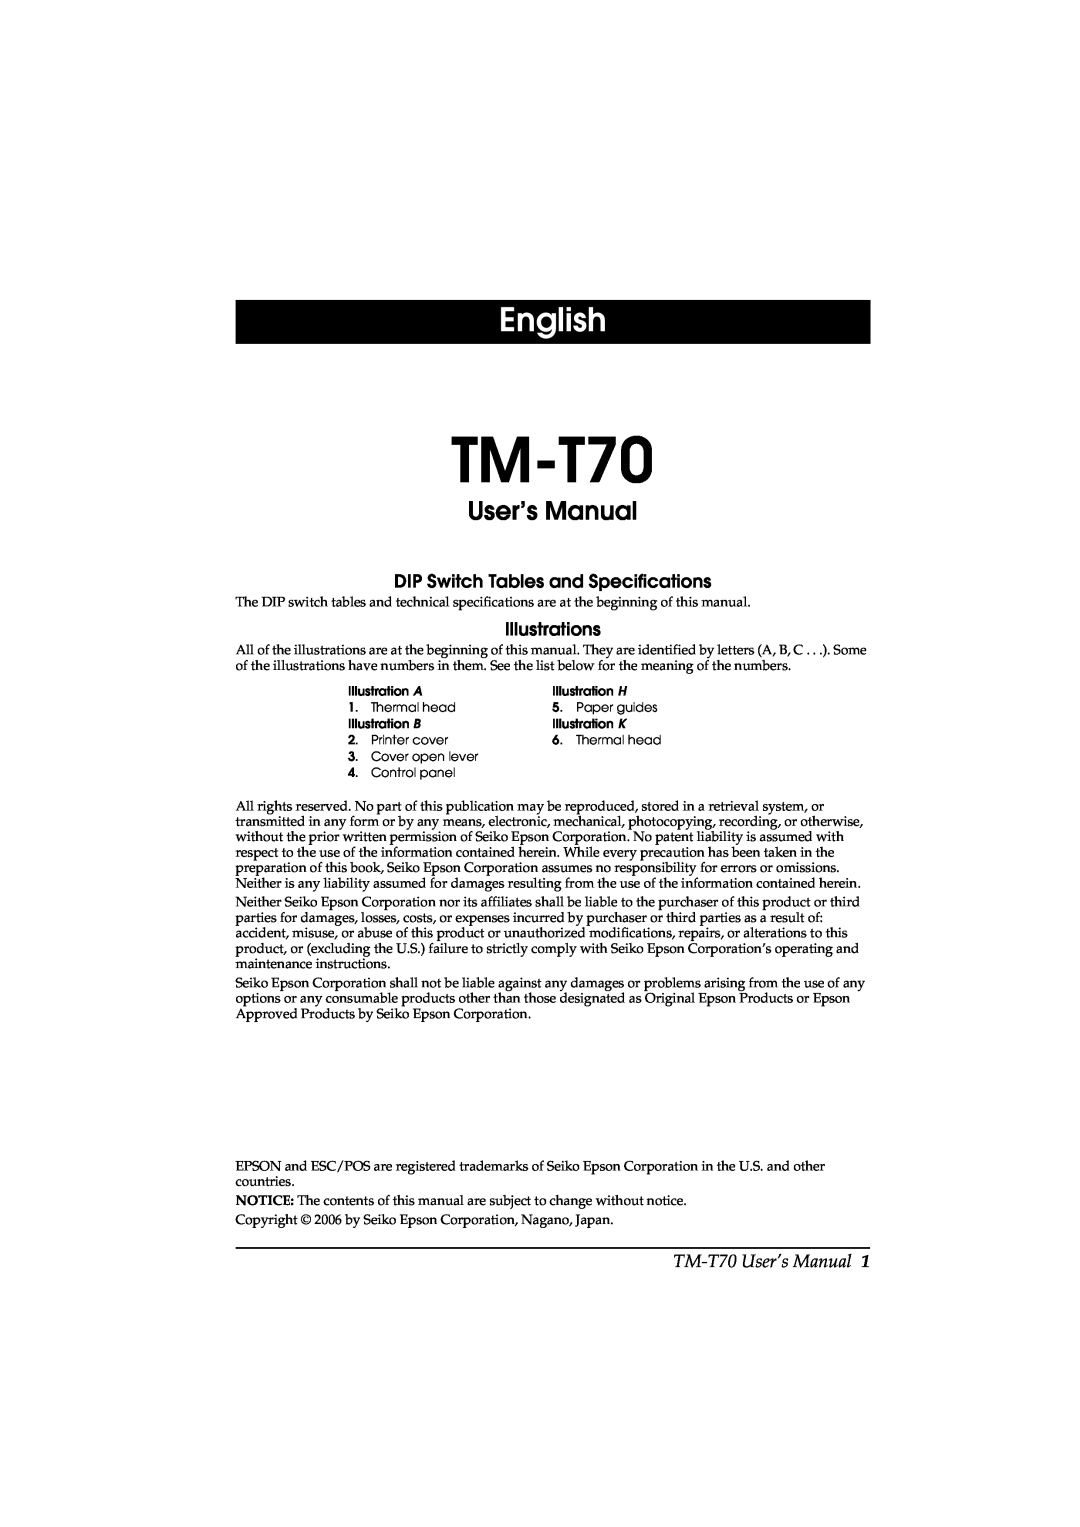 Seiko Group user manual English, DIP Switch Tables and Specifications, Illustrations, TM-T70 User’s Manual 